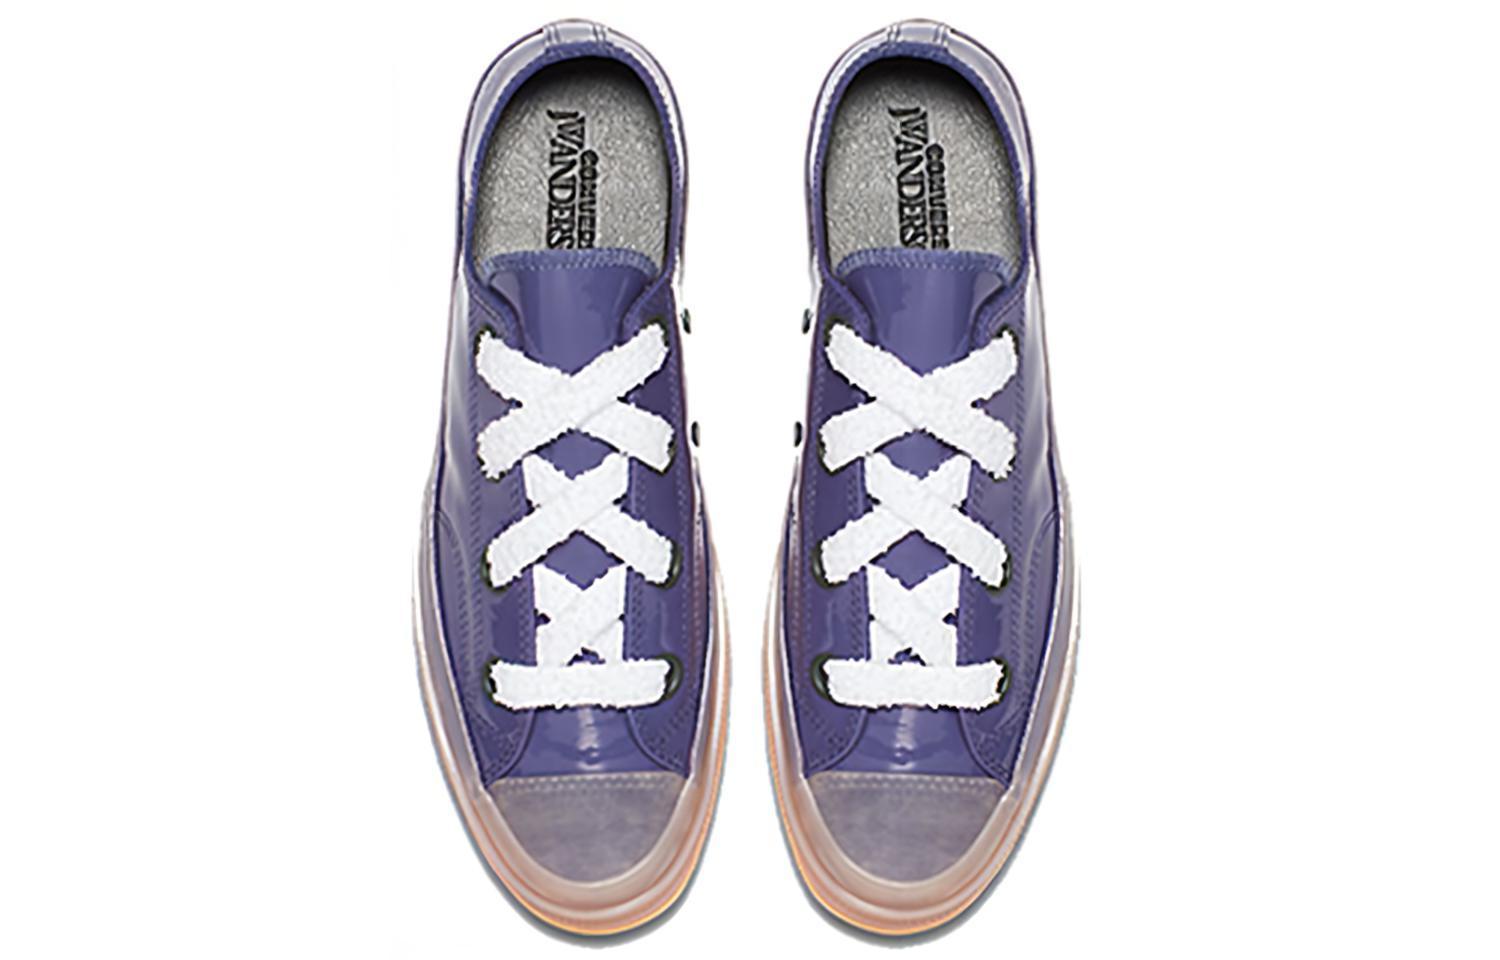 JW Anderson x Converse 1970s Patent Leather Chuck 70 Low Top